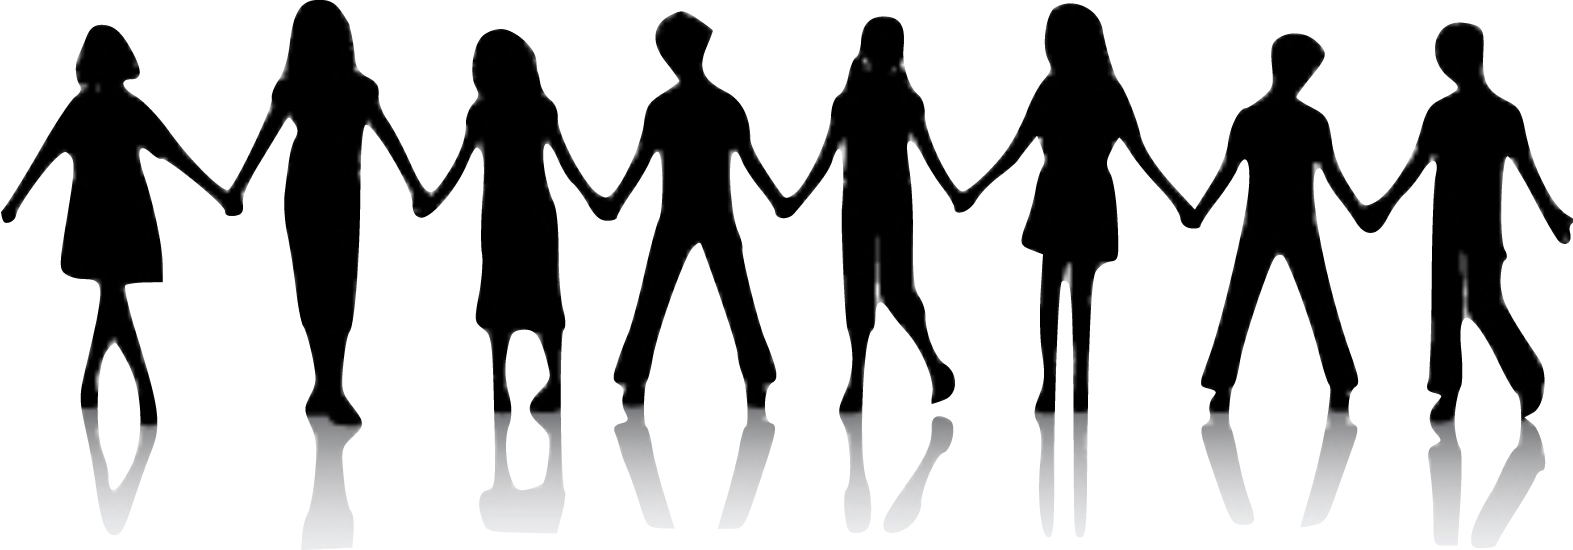 Friendship Day Free Transparent Image HQ PNG Image